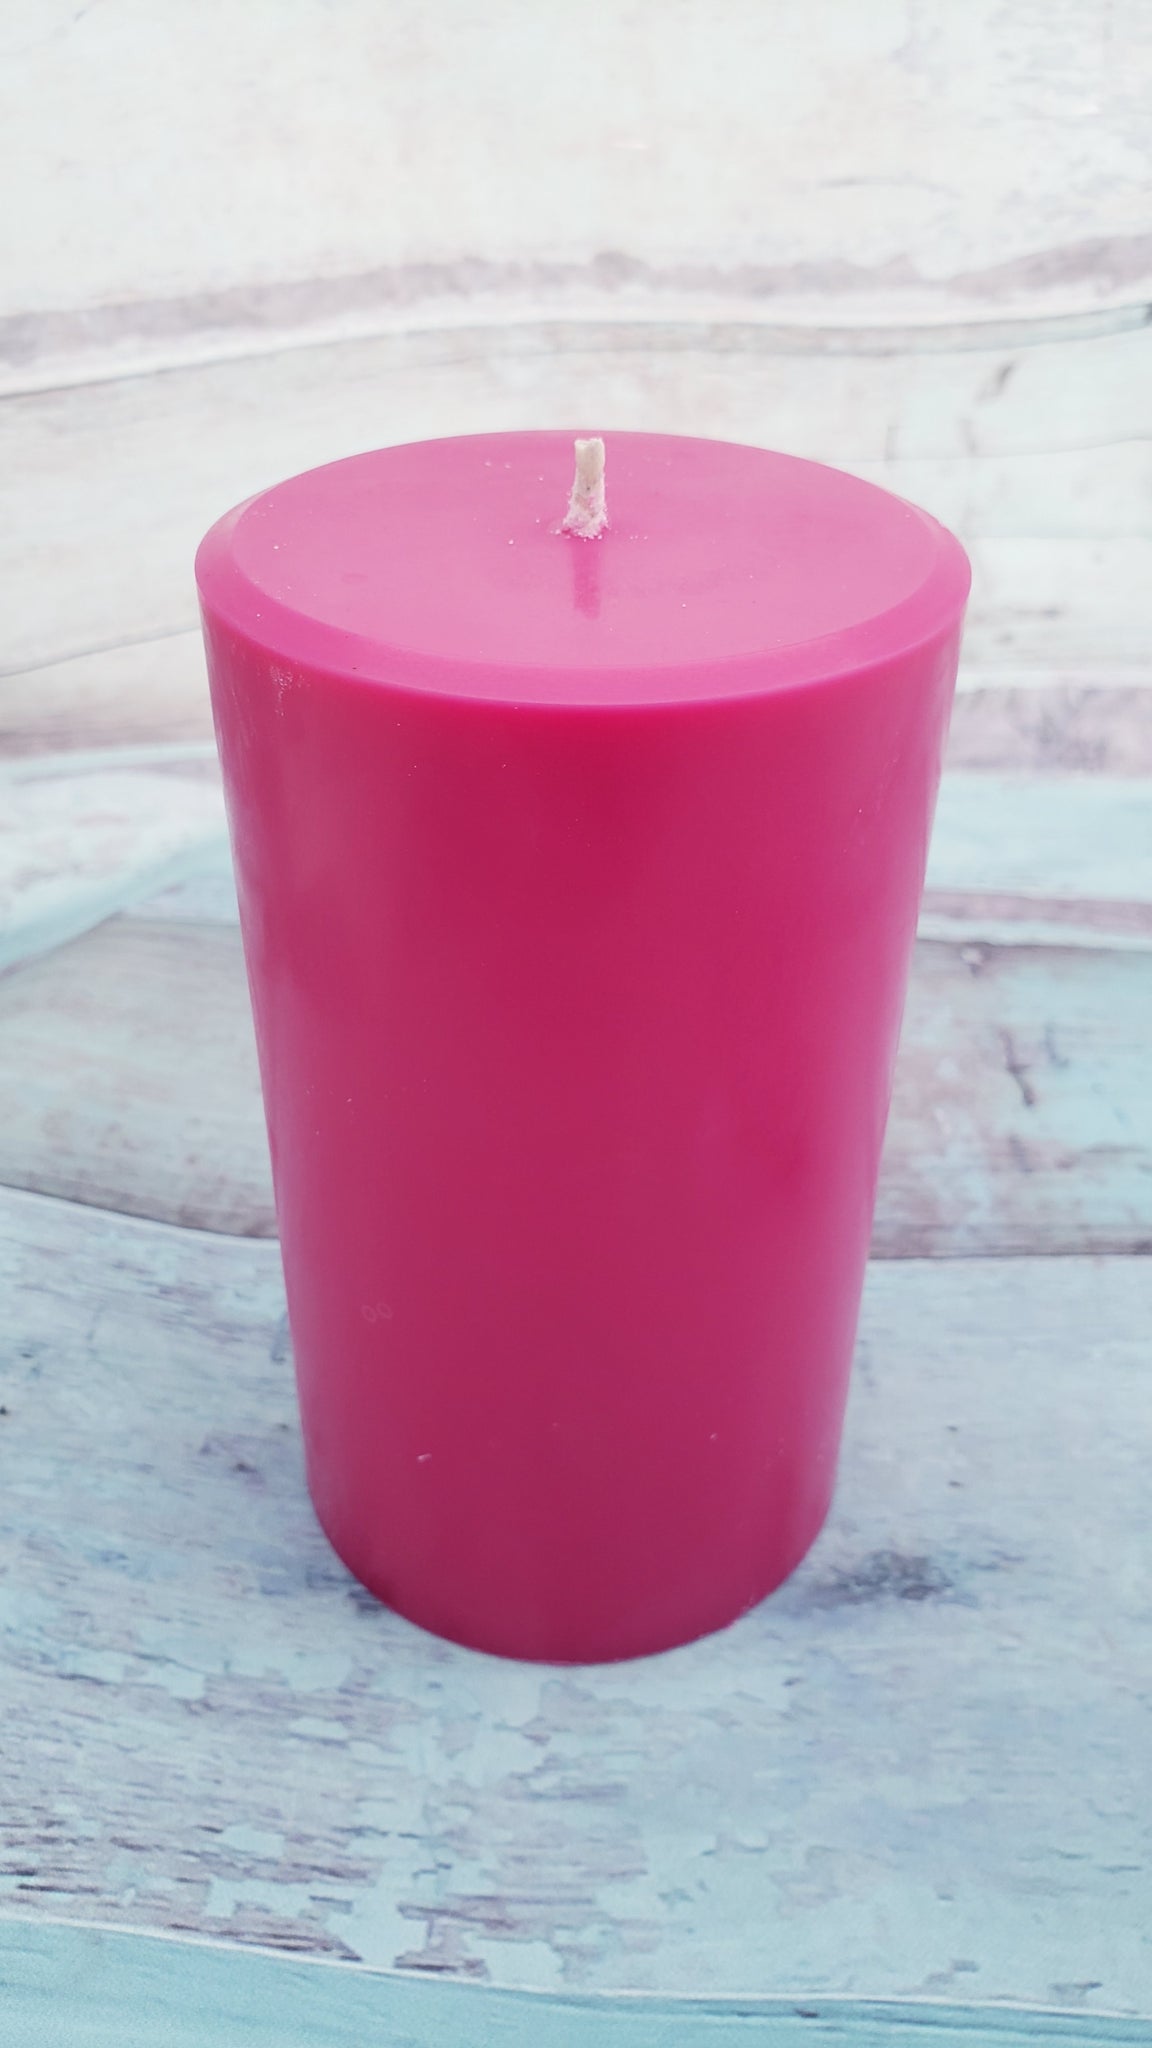 PILLAR Soy Wax, All Natural for Wax Melts, Molds, Votives, and